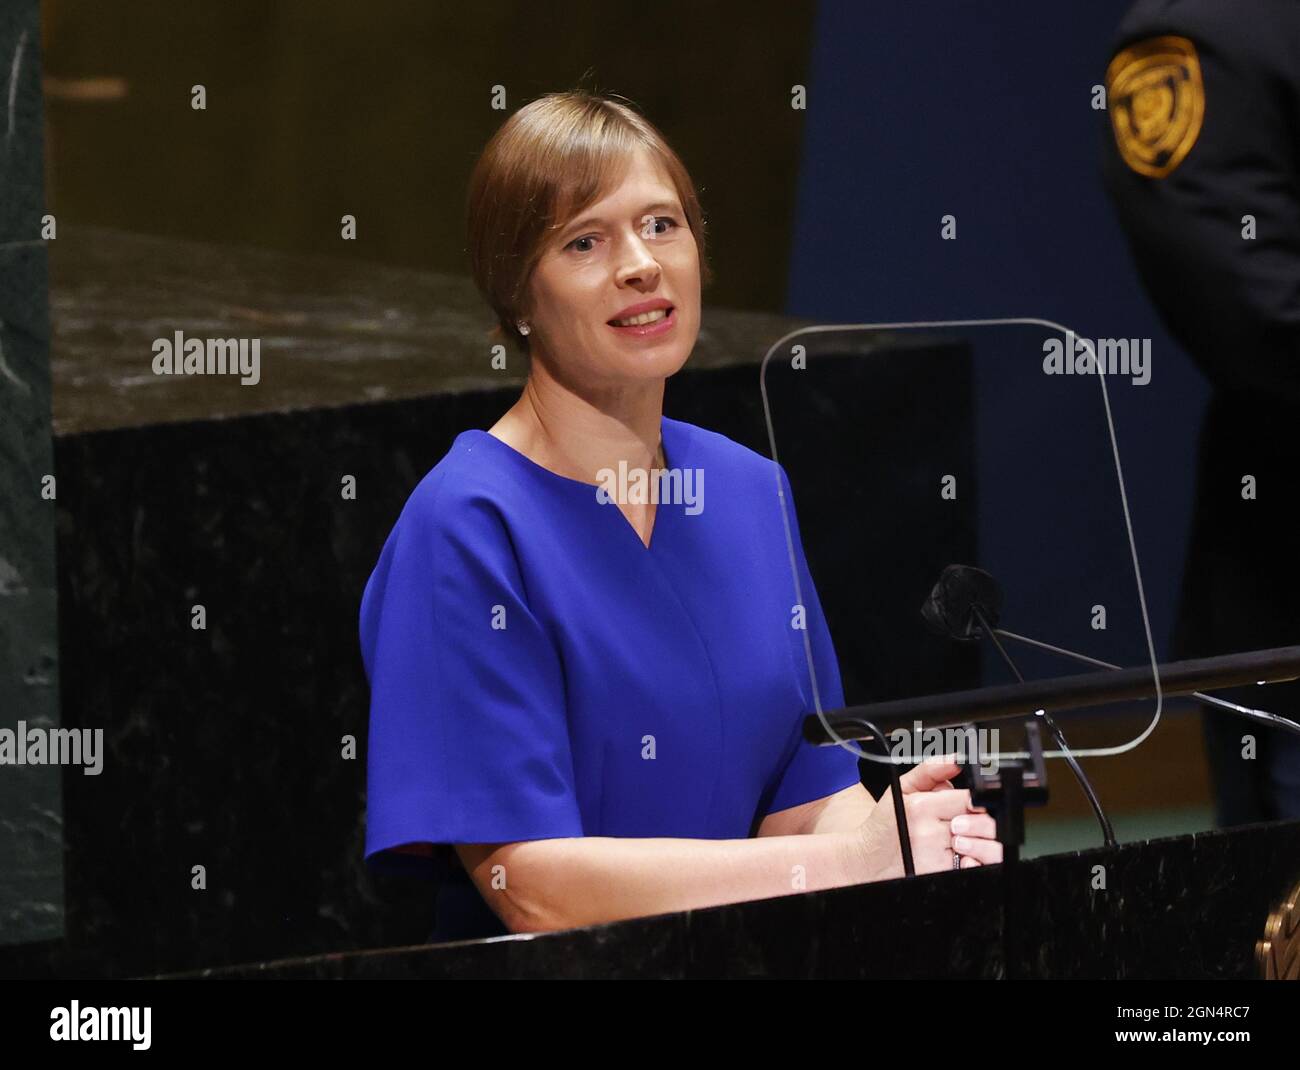 New York, United States. 22nd Sep, 2021. President of the Republic of Estonia Kersti Kaljulaid speaks at the UN General Assembly 76th session General Debate in UN General Assembly Hall at the United Nations Headquarters on Wednesday, September 22, 2021 in New York City. Photo by John Angelillo/UPI Credit: UPI/Alamy Live News Stock Photo